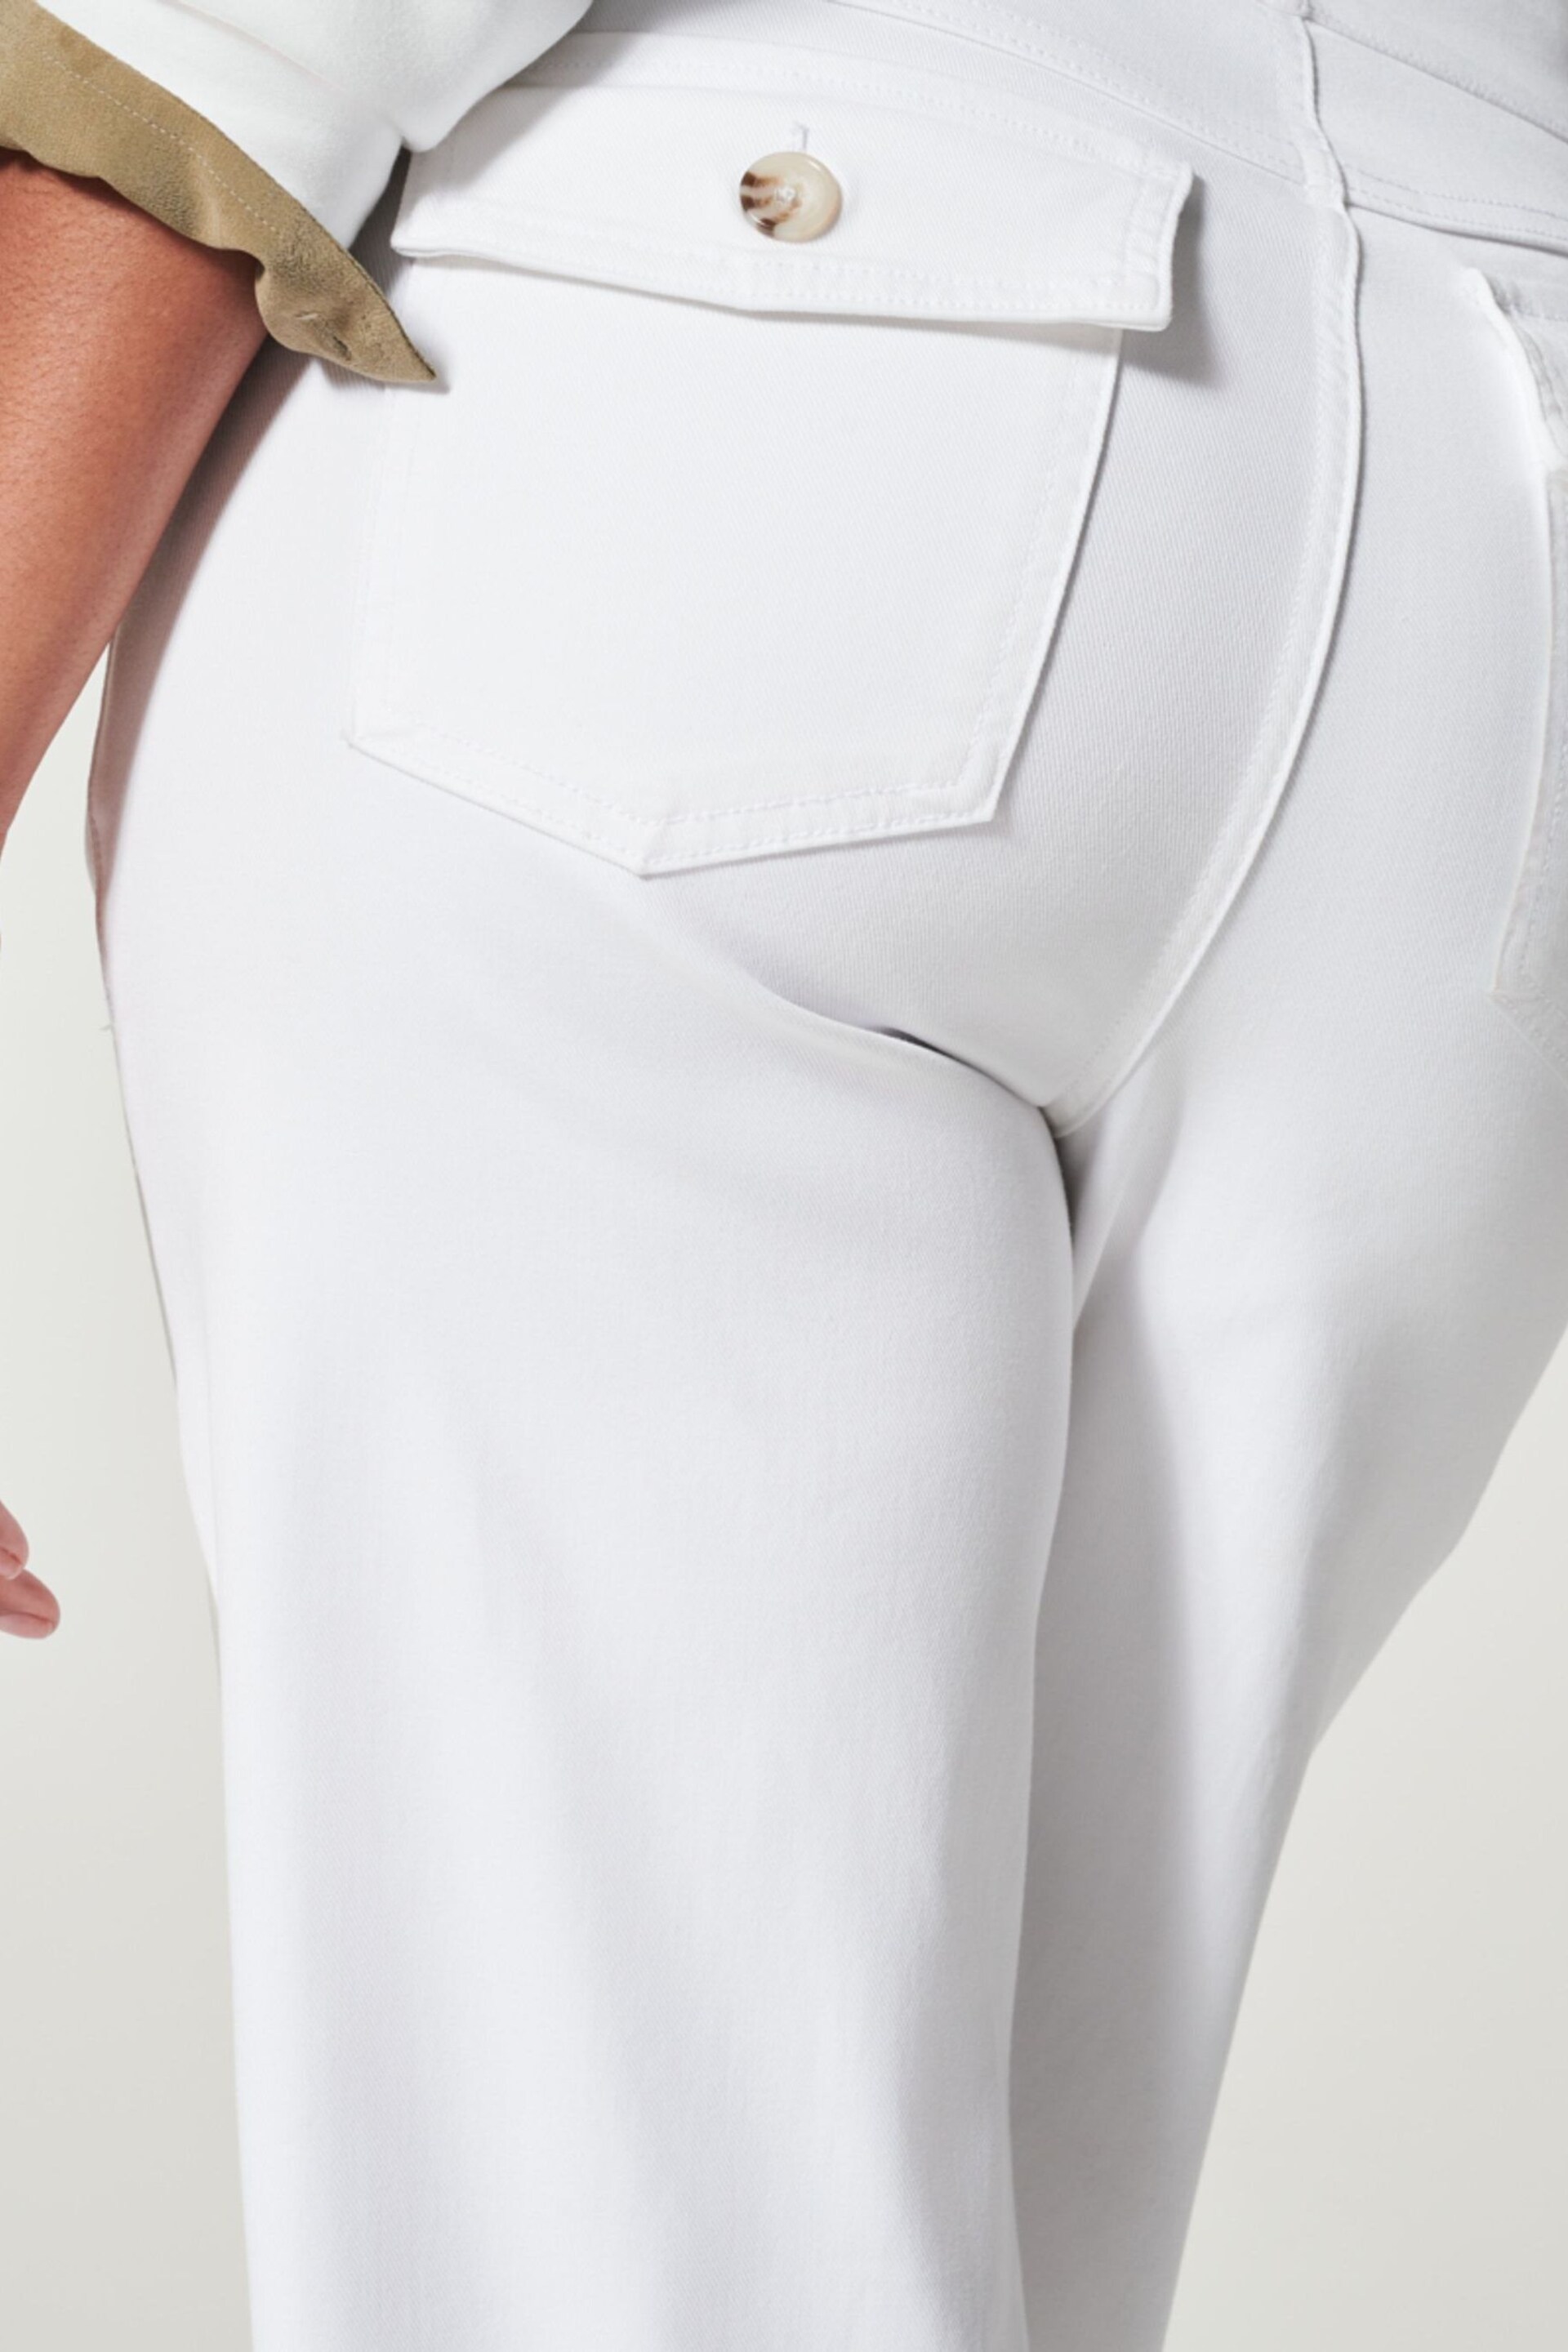 Spanx Stretch Twill Cropped Wide Leg White Trousers - Image 3 of 4